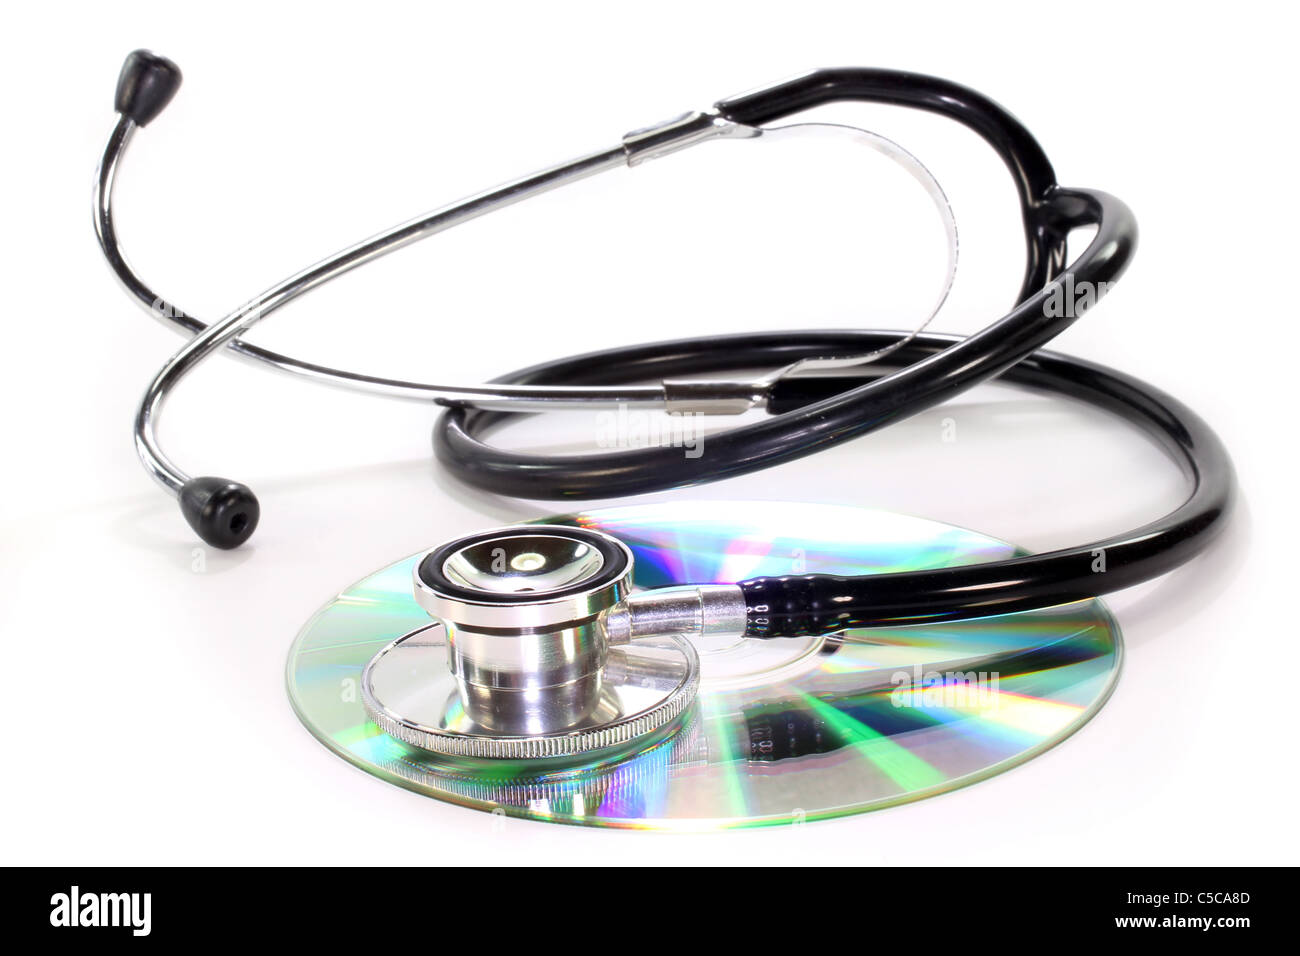 Cd and stethoscope on a white background Stock Photo